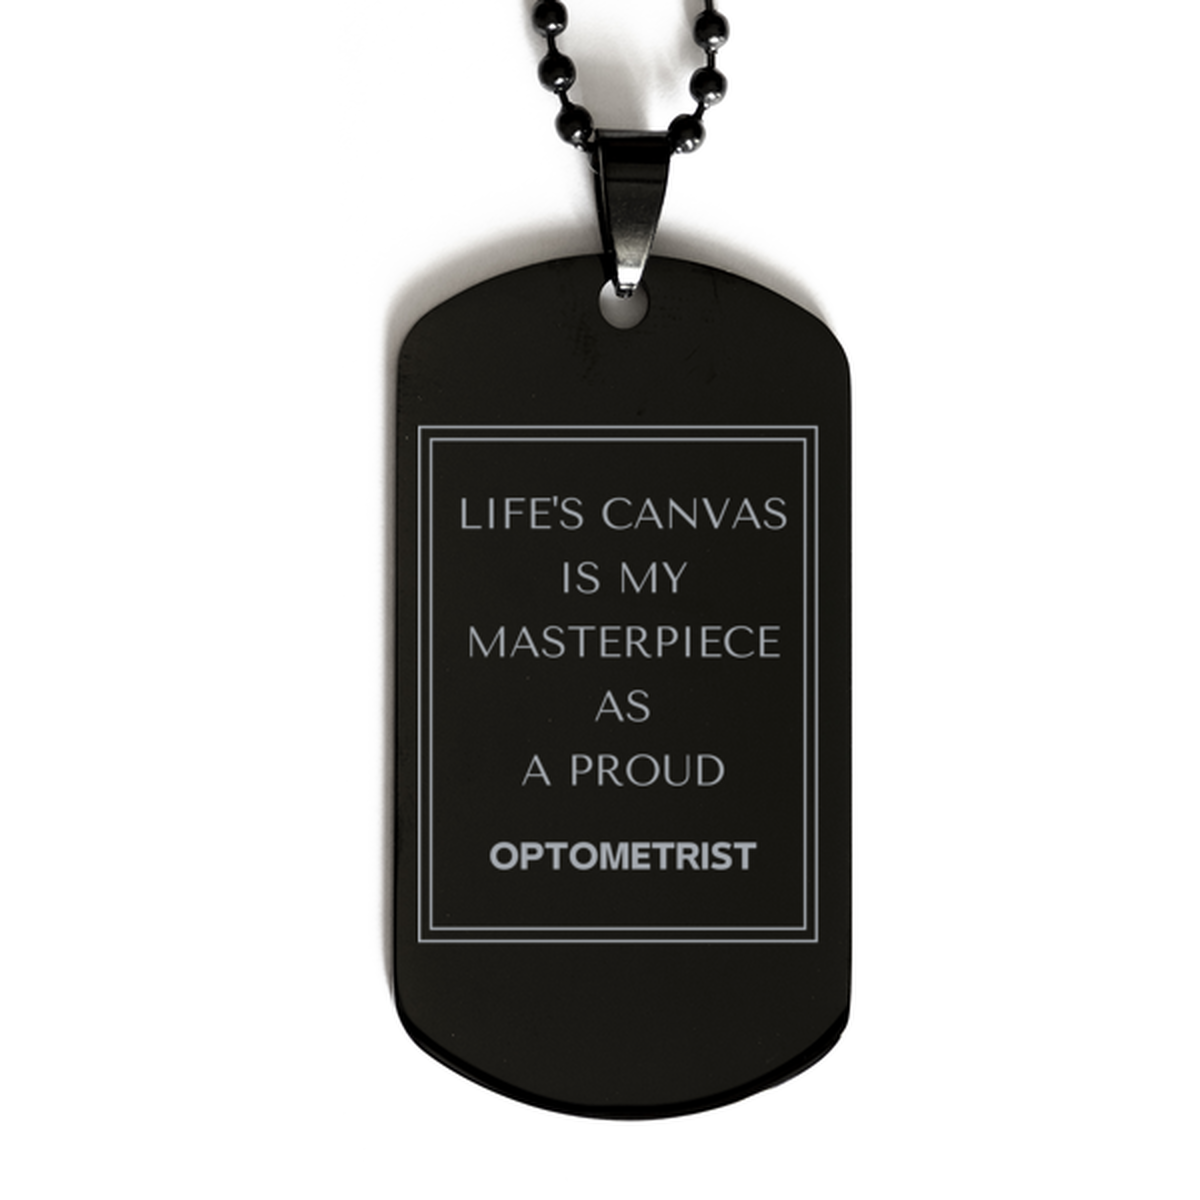 Proud Optometrist Gifts, Life's canvas is my masterpiece, Epic Birthday Christmas Unique Black Dog Tag For Optometrist, Coworkers, Men, Women, Friends